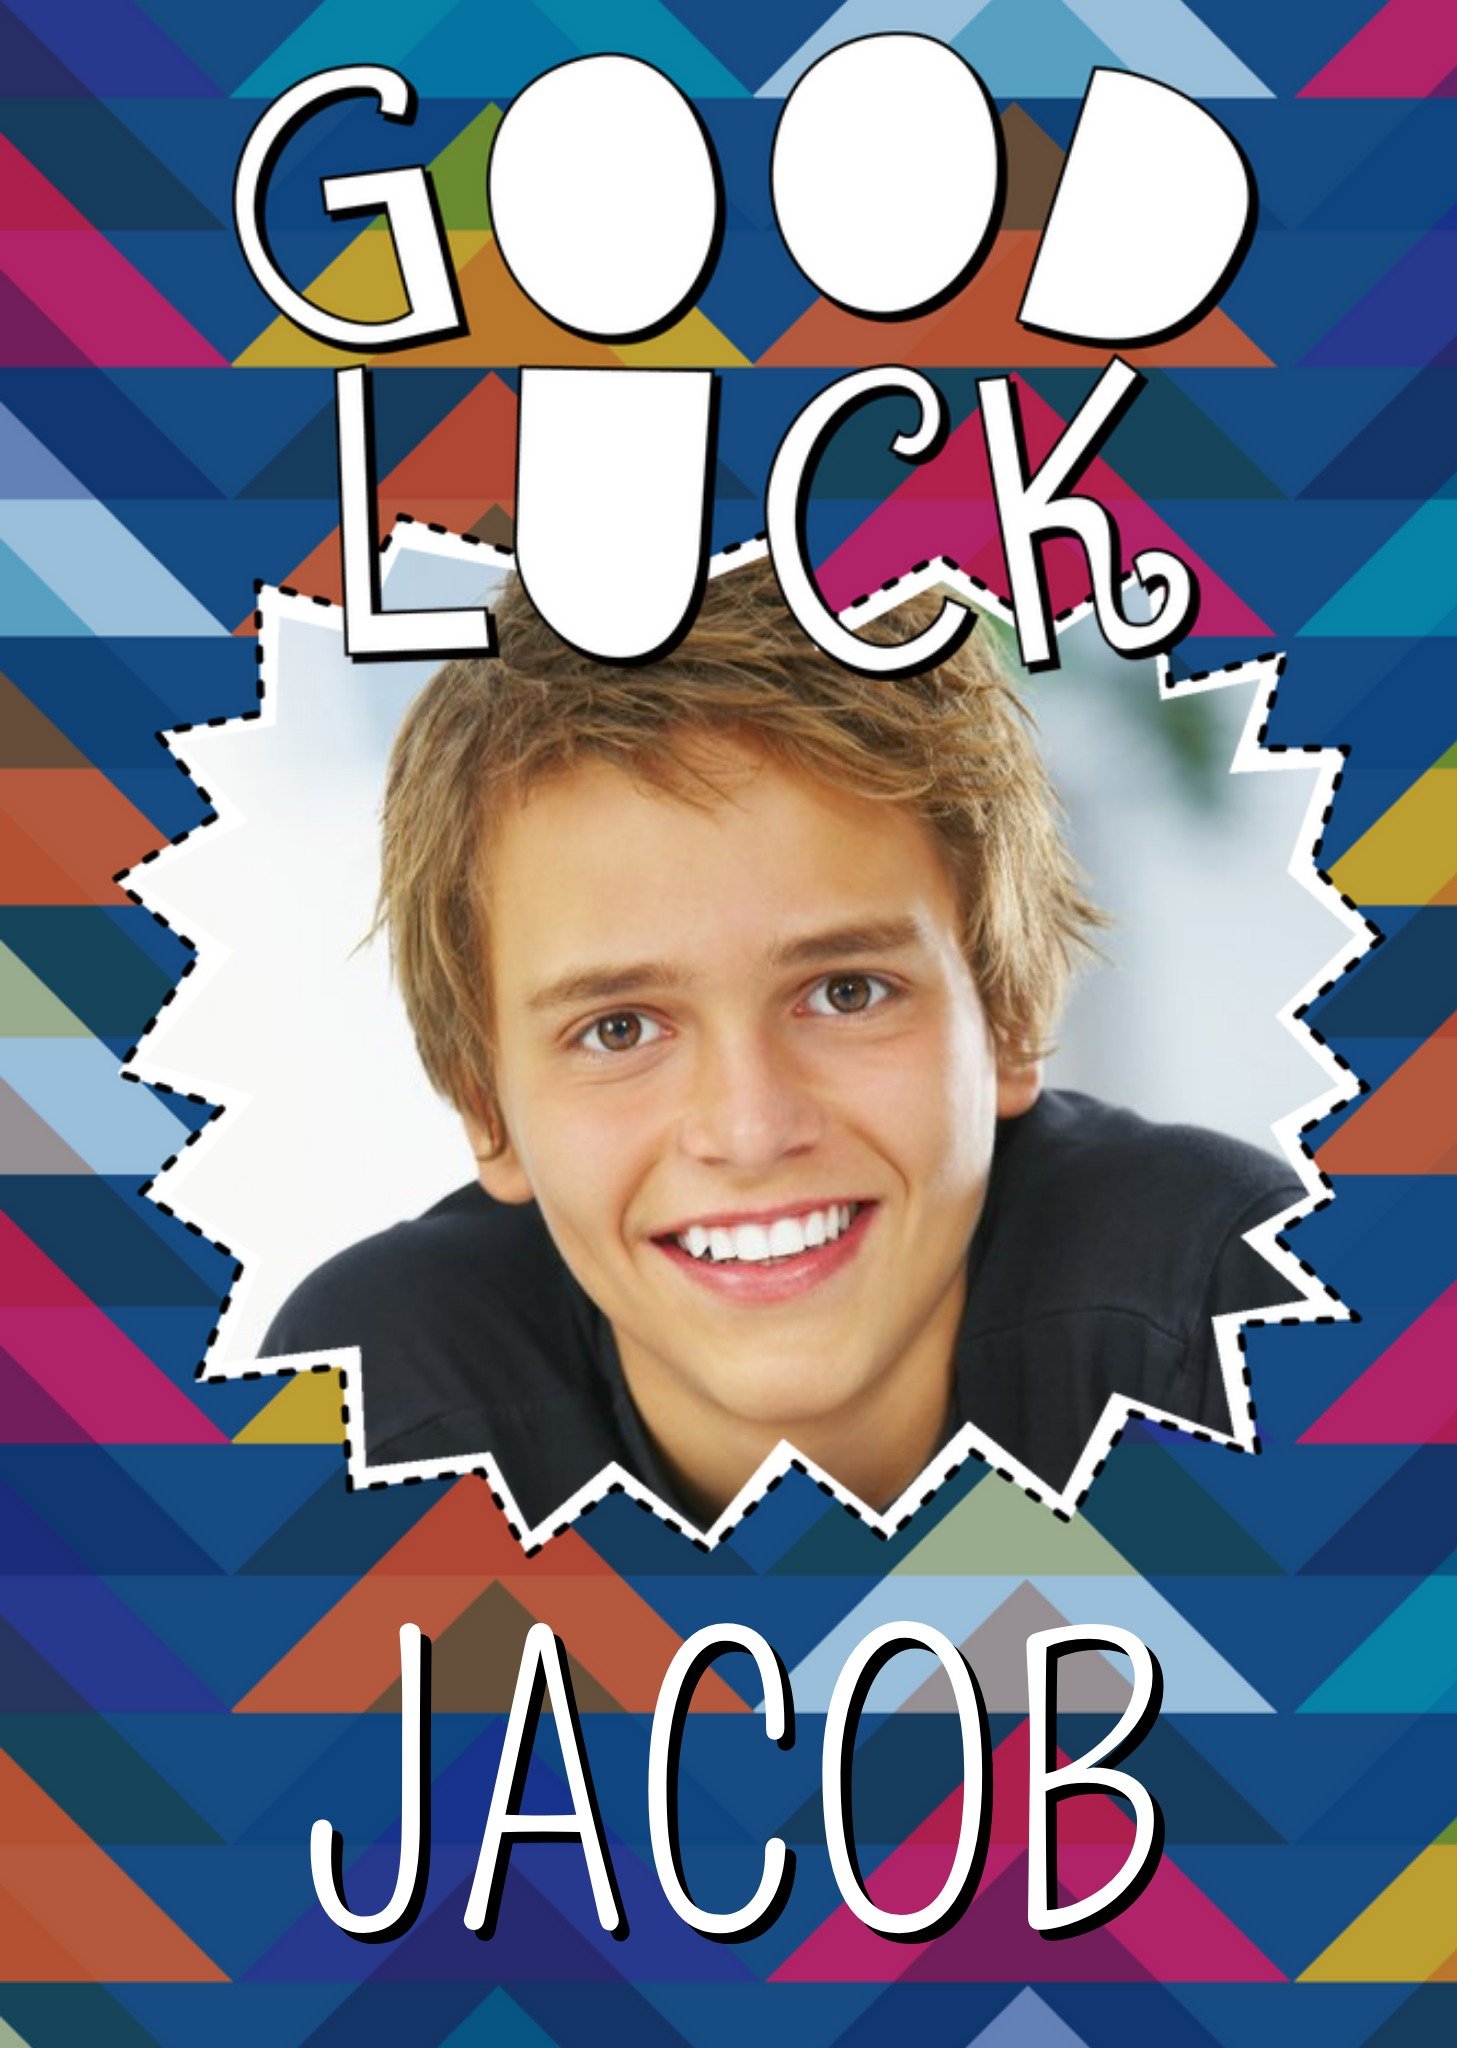 Moonpig Colourful Patterned Personalised Photo Upload Good Luck Card, Large